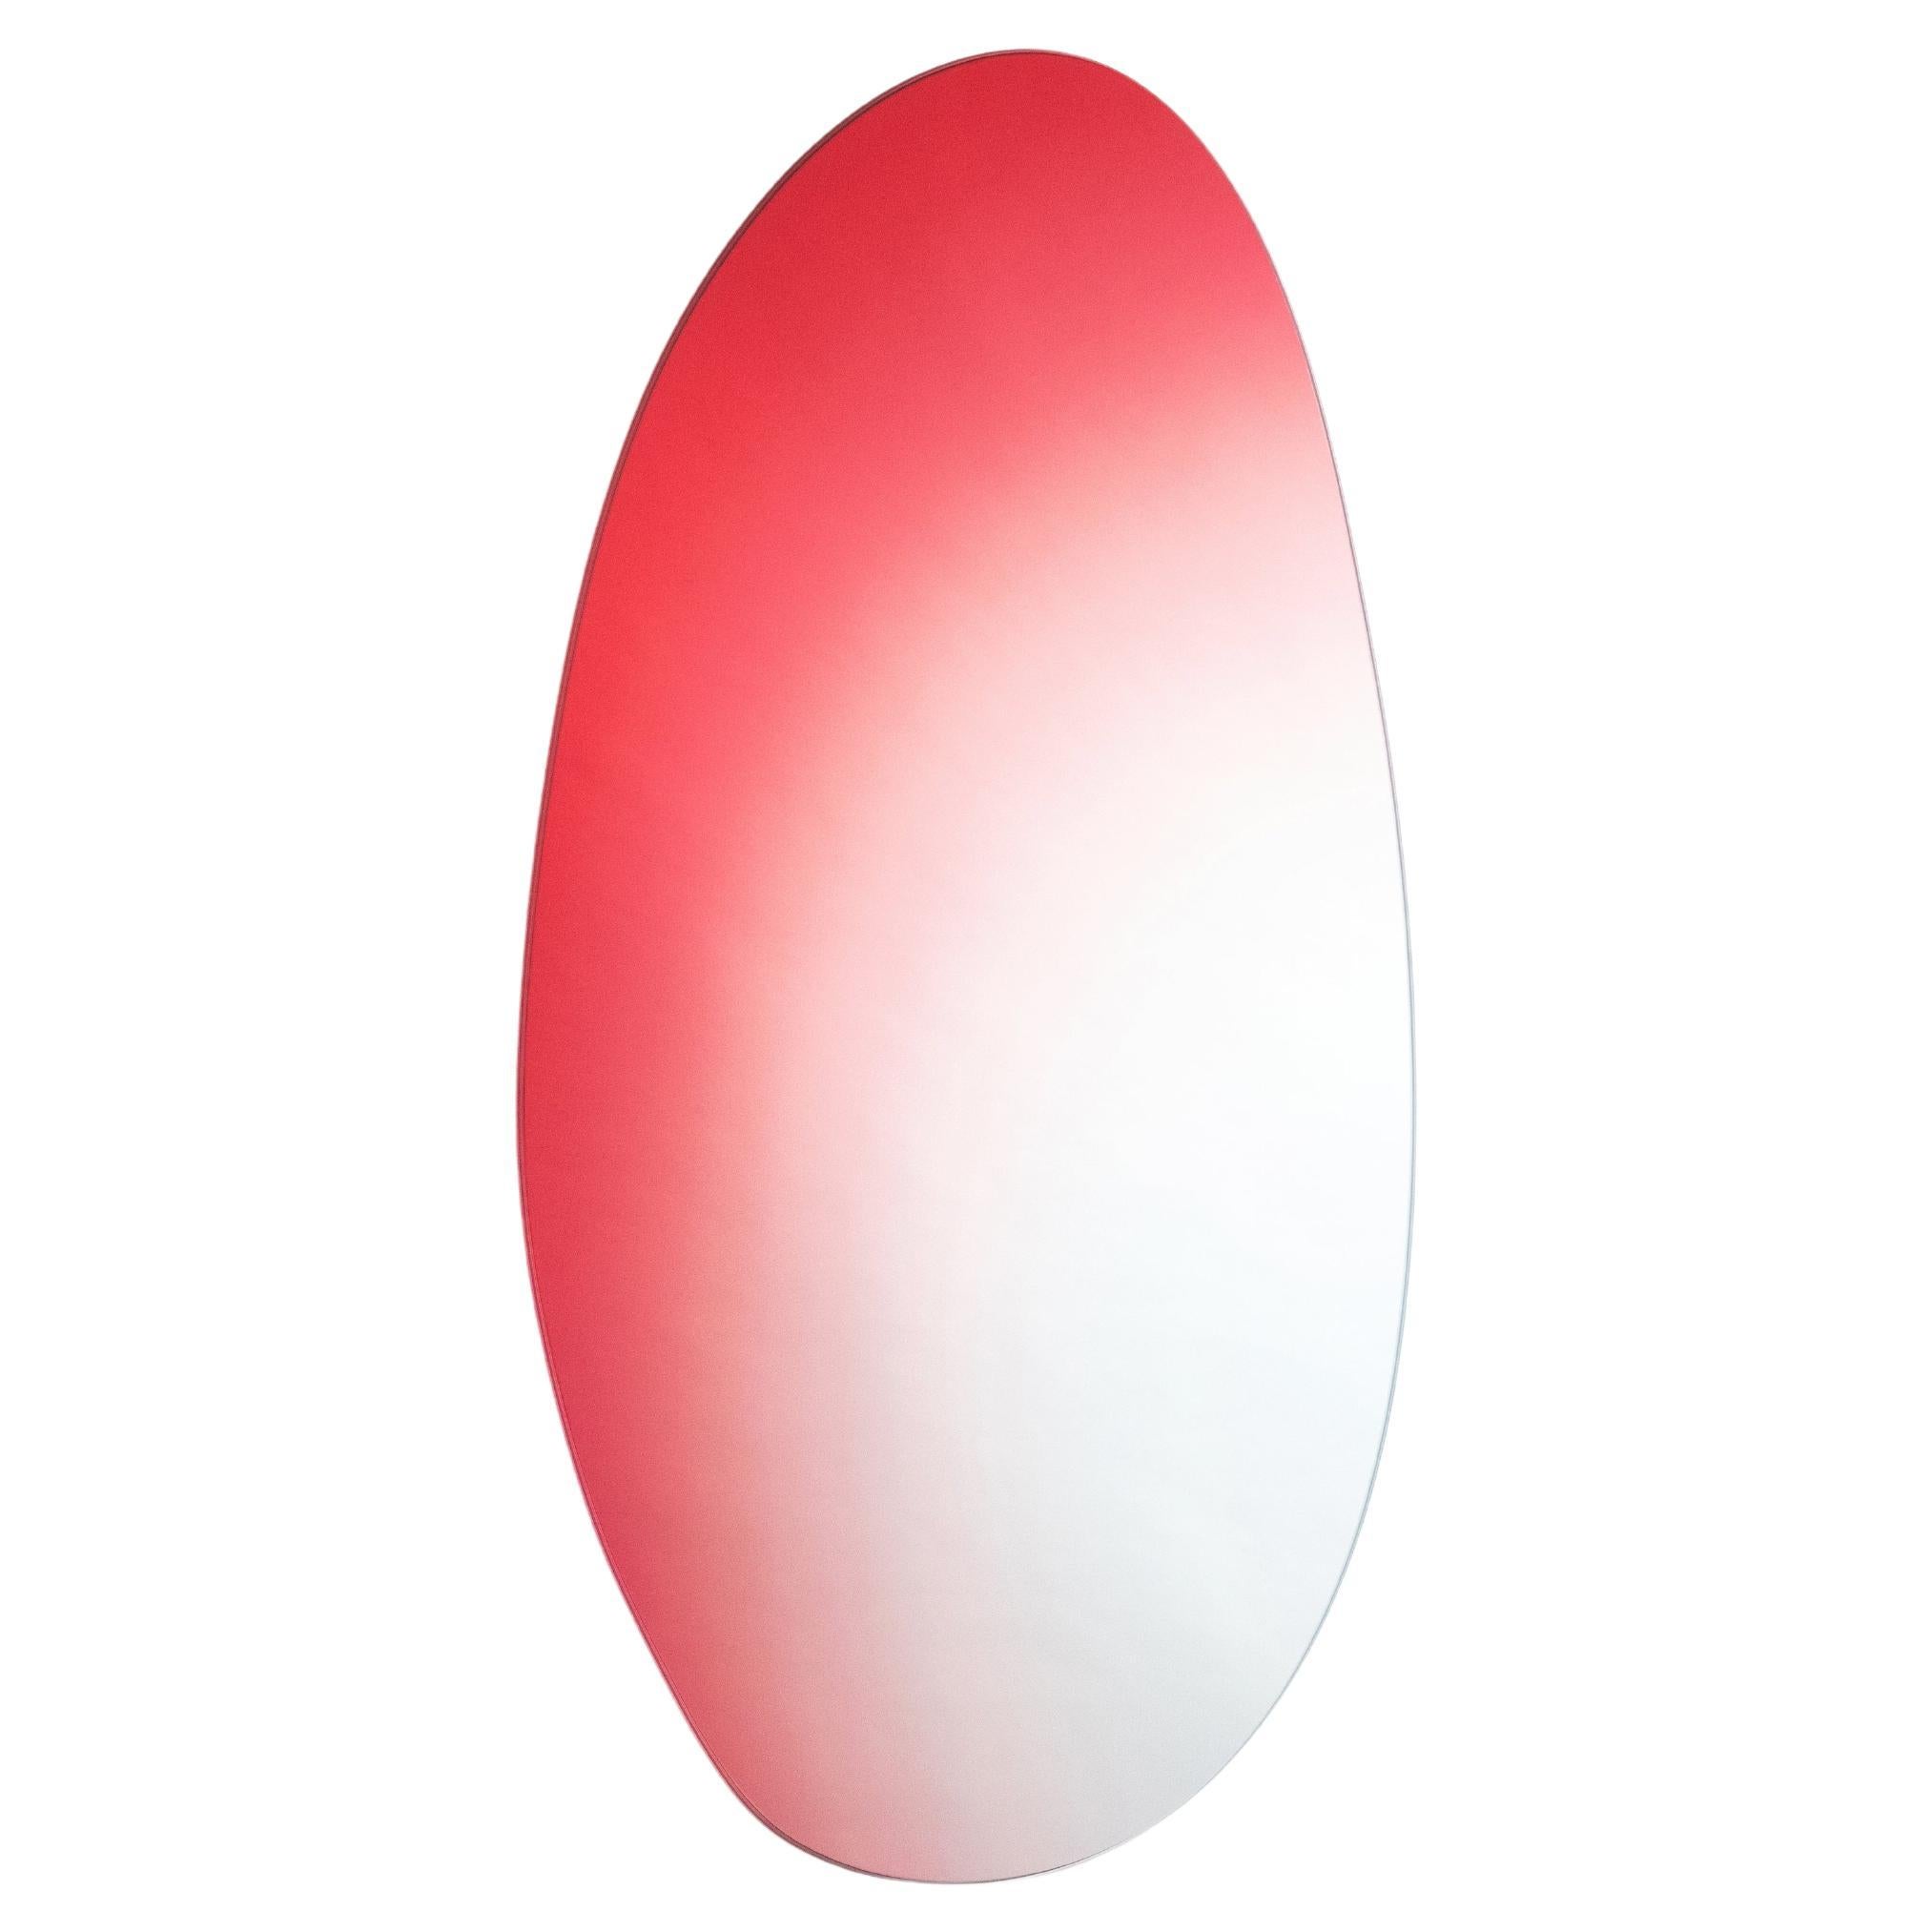 Contemporary Red Body Mirror, Off Round Hue #2, Wall Mirror by Sabine Marcelis For Sale